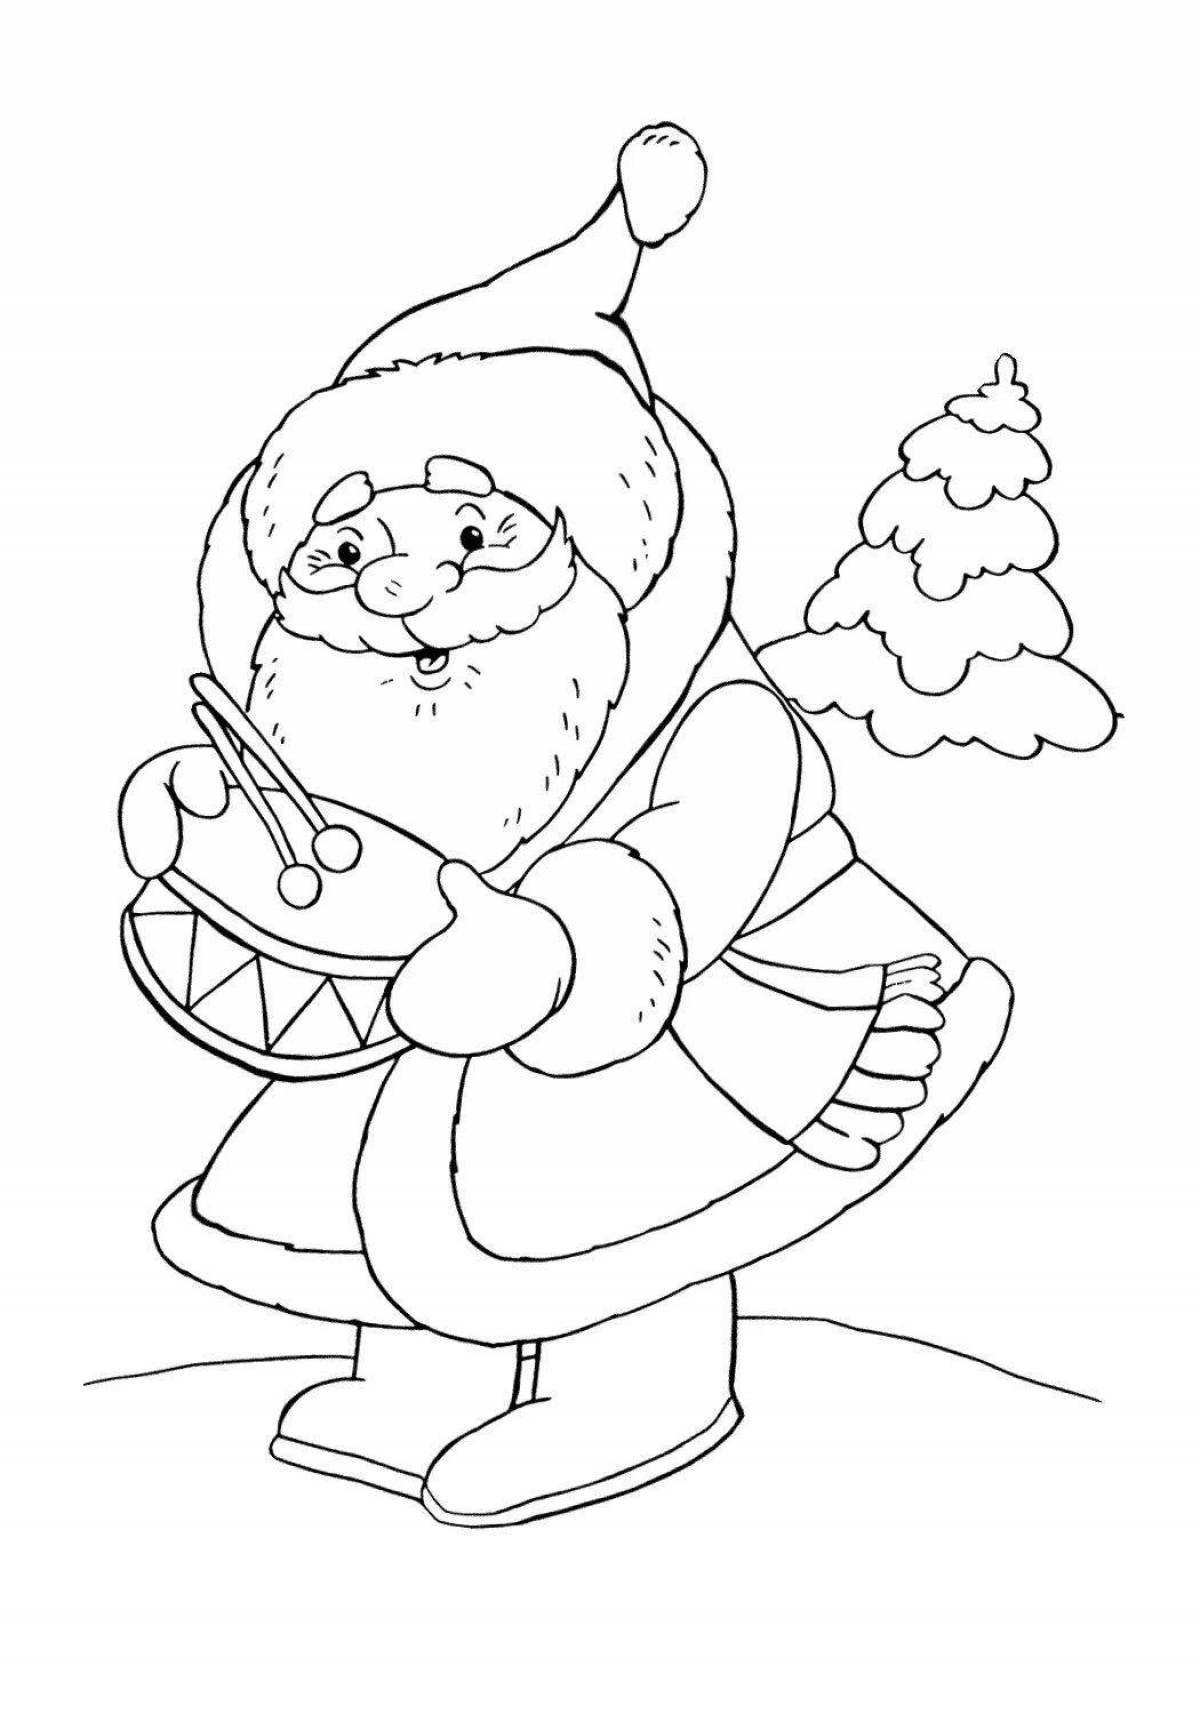 Shine frosty coloring book for kids